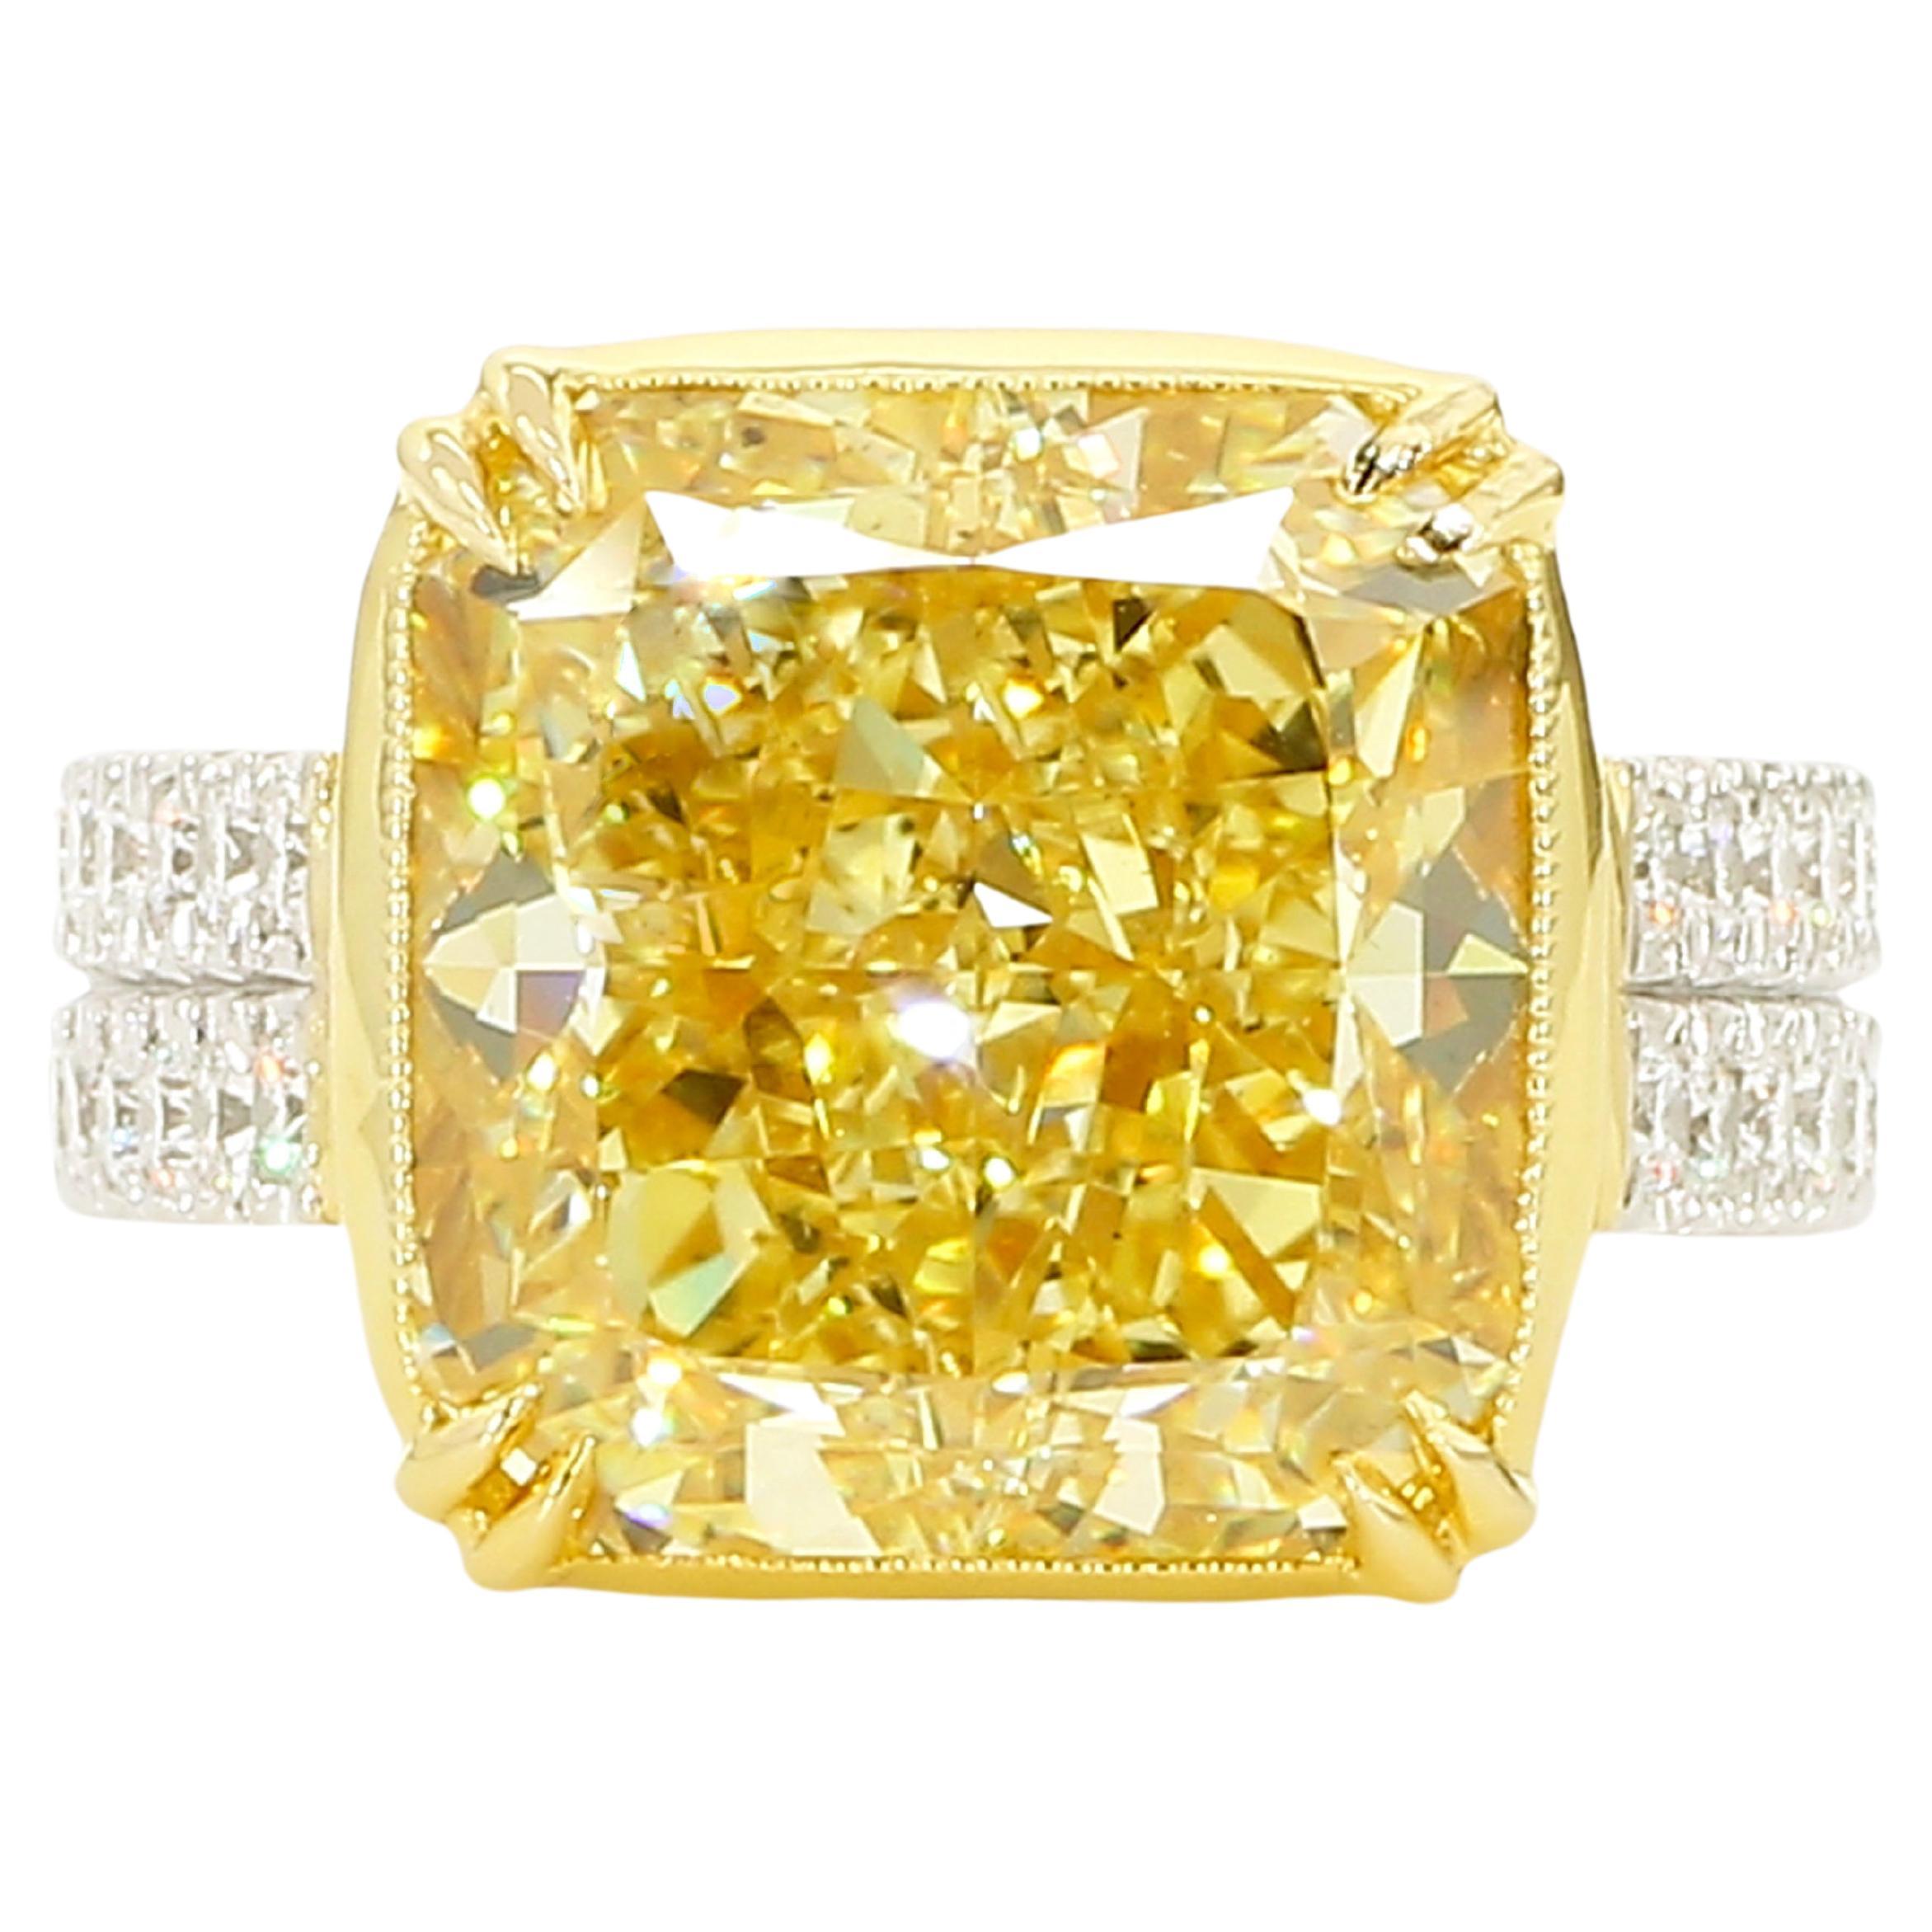 Just under 12 Carat Fancy Yellow Diamond Engagement Ring, In Platinum GIA Cert. For Sale